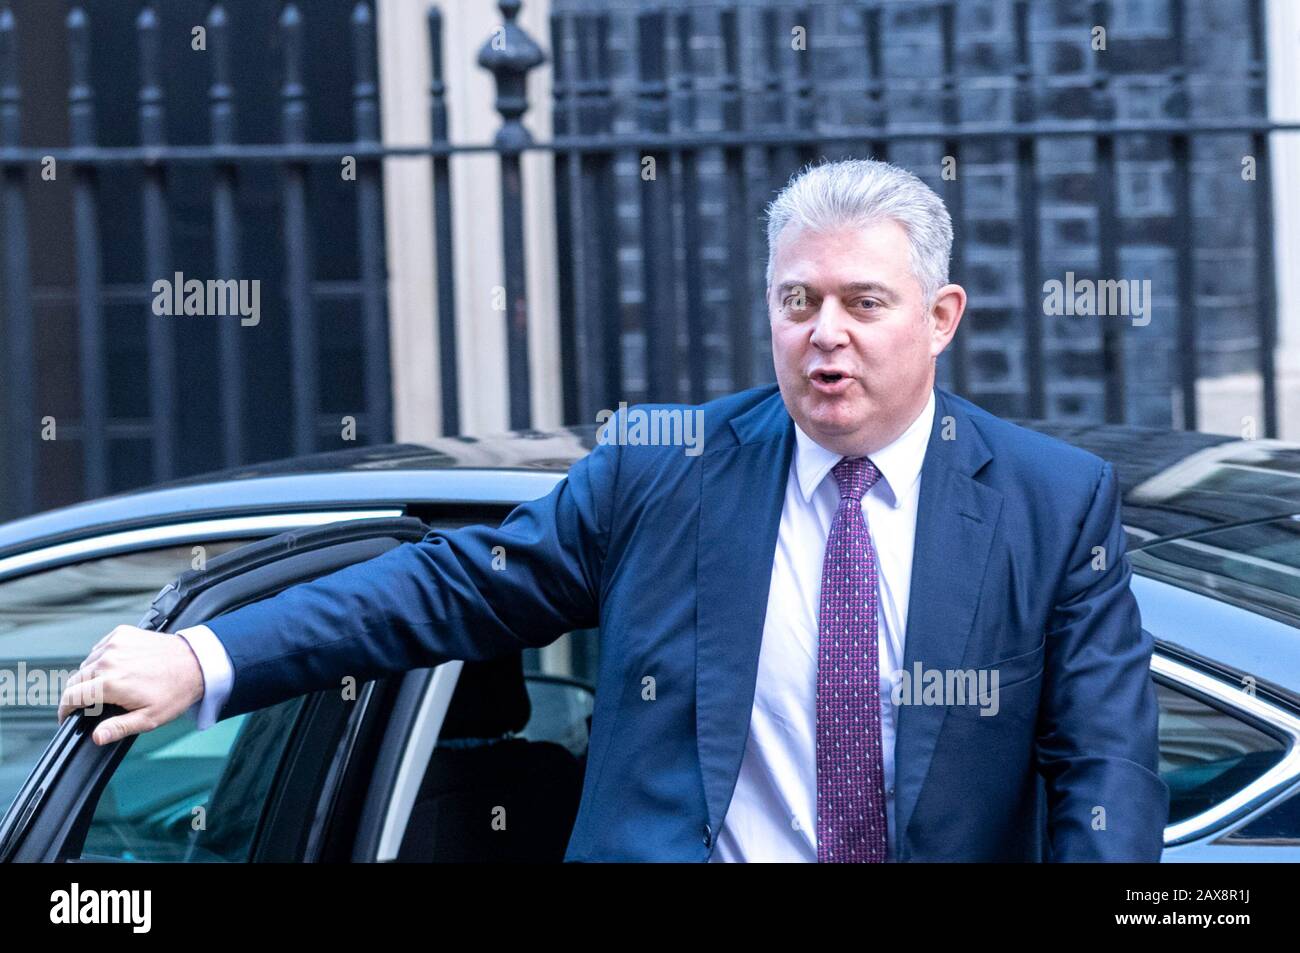 London, UK. 11th Feb, 2020. Brandon Lewis MP PC Minister for Security arrives at a special Cabinet meeting to discuss HS2 at 10 Downing Street, London Credit: Ian Davidson/Alamy Live News Stock Photo